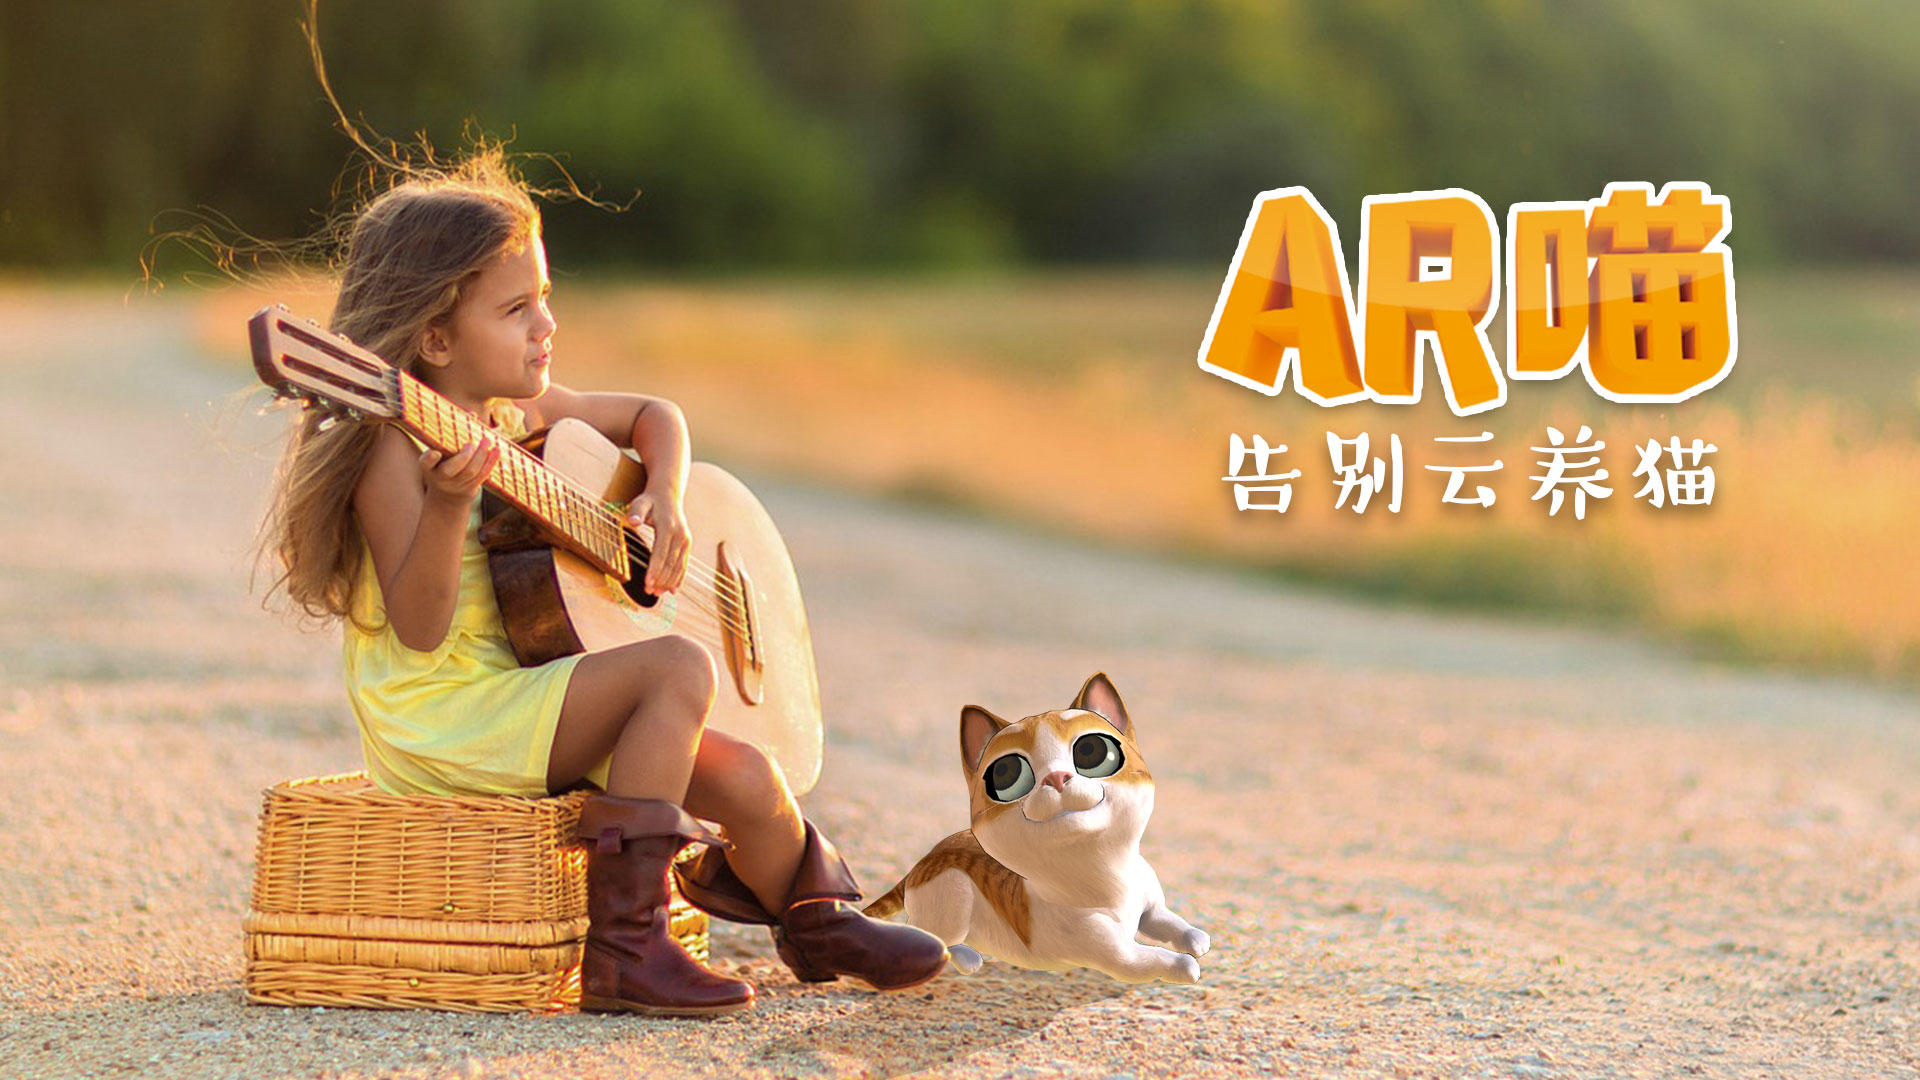 Banner of AR야옹 